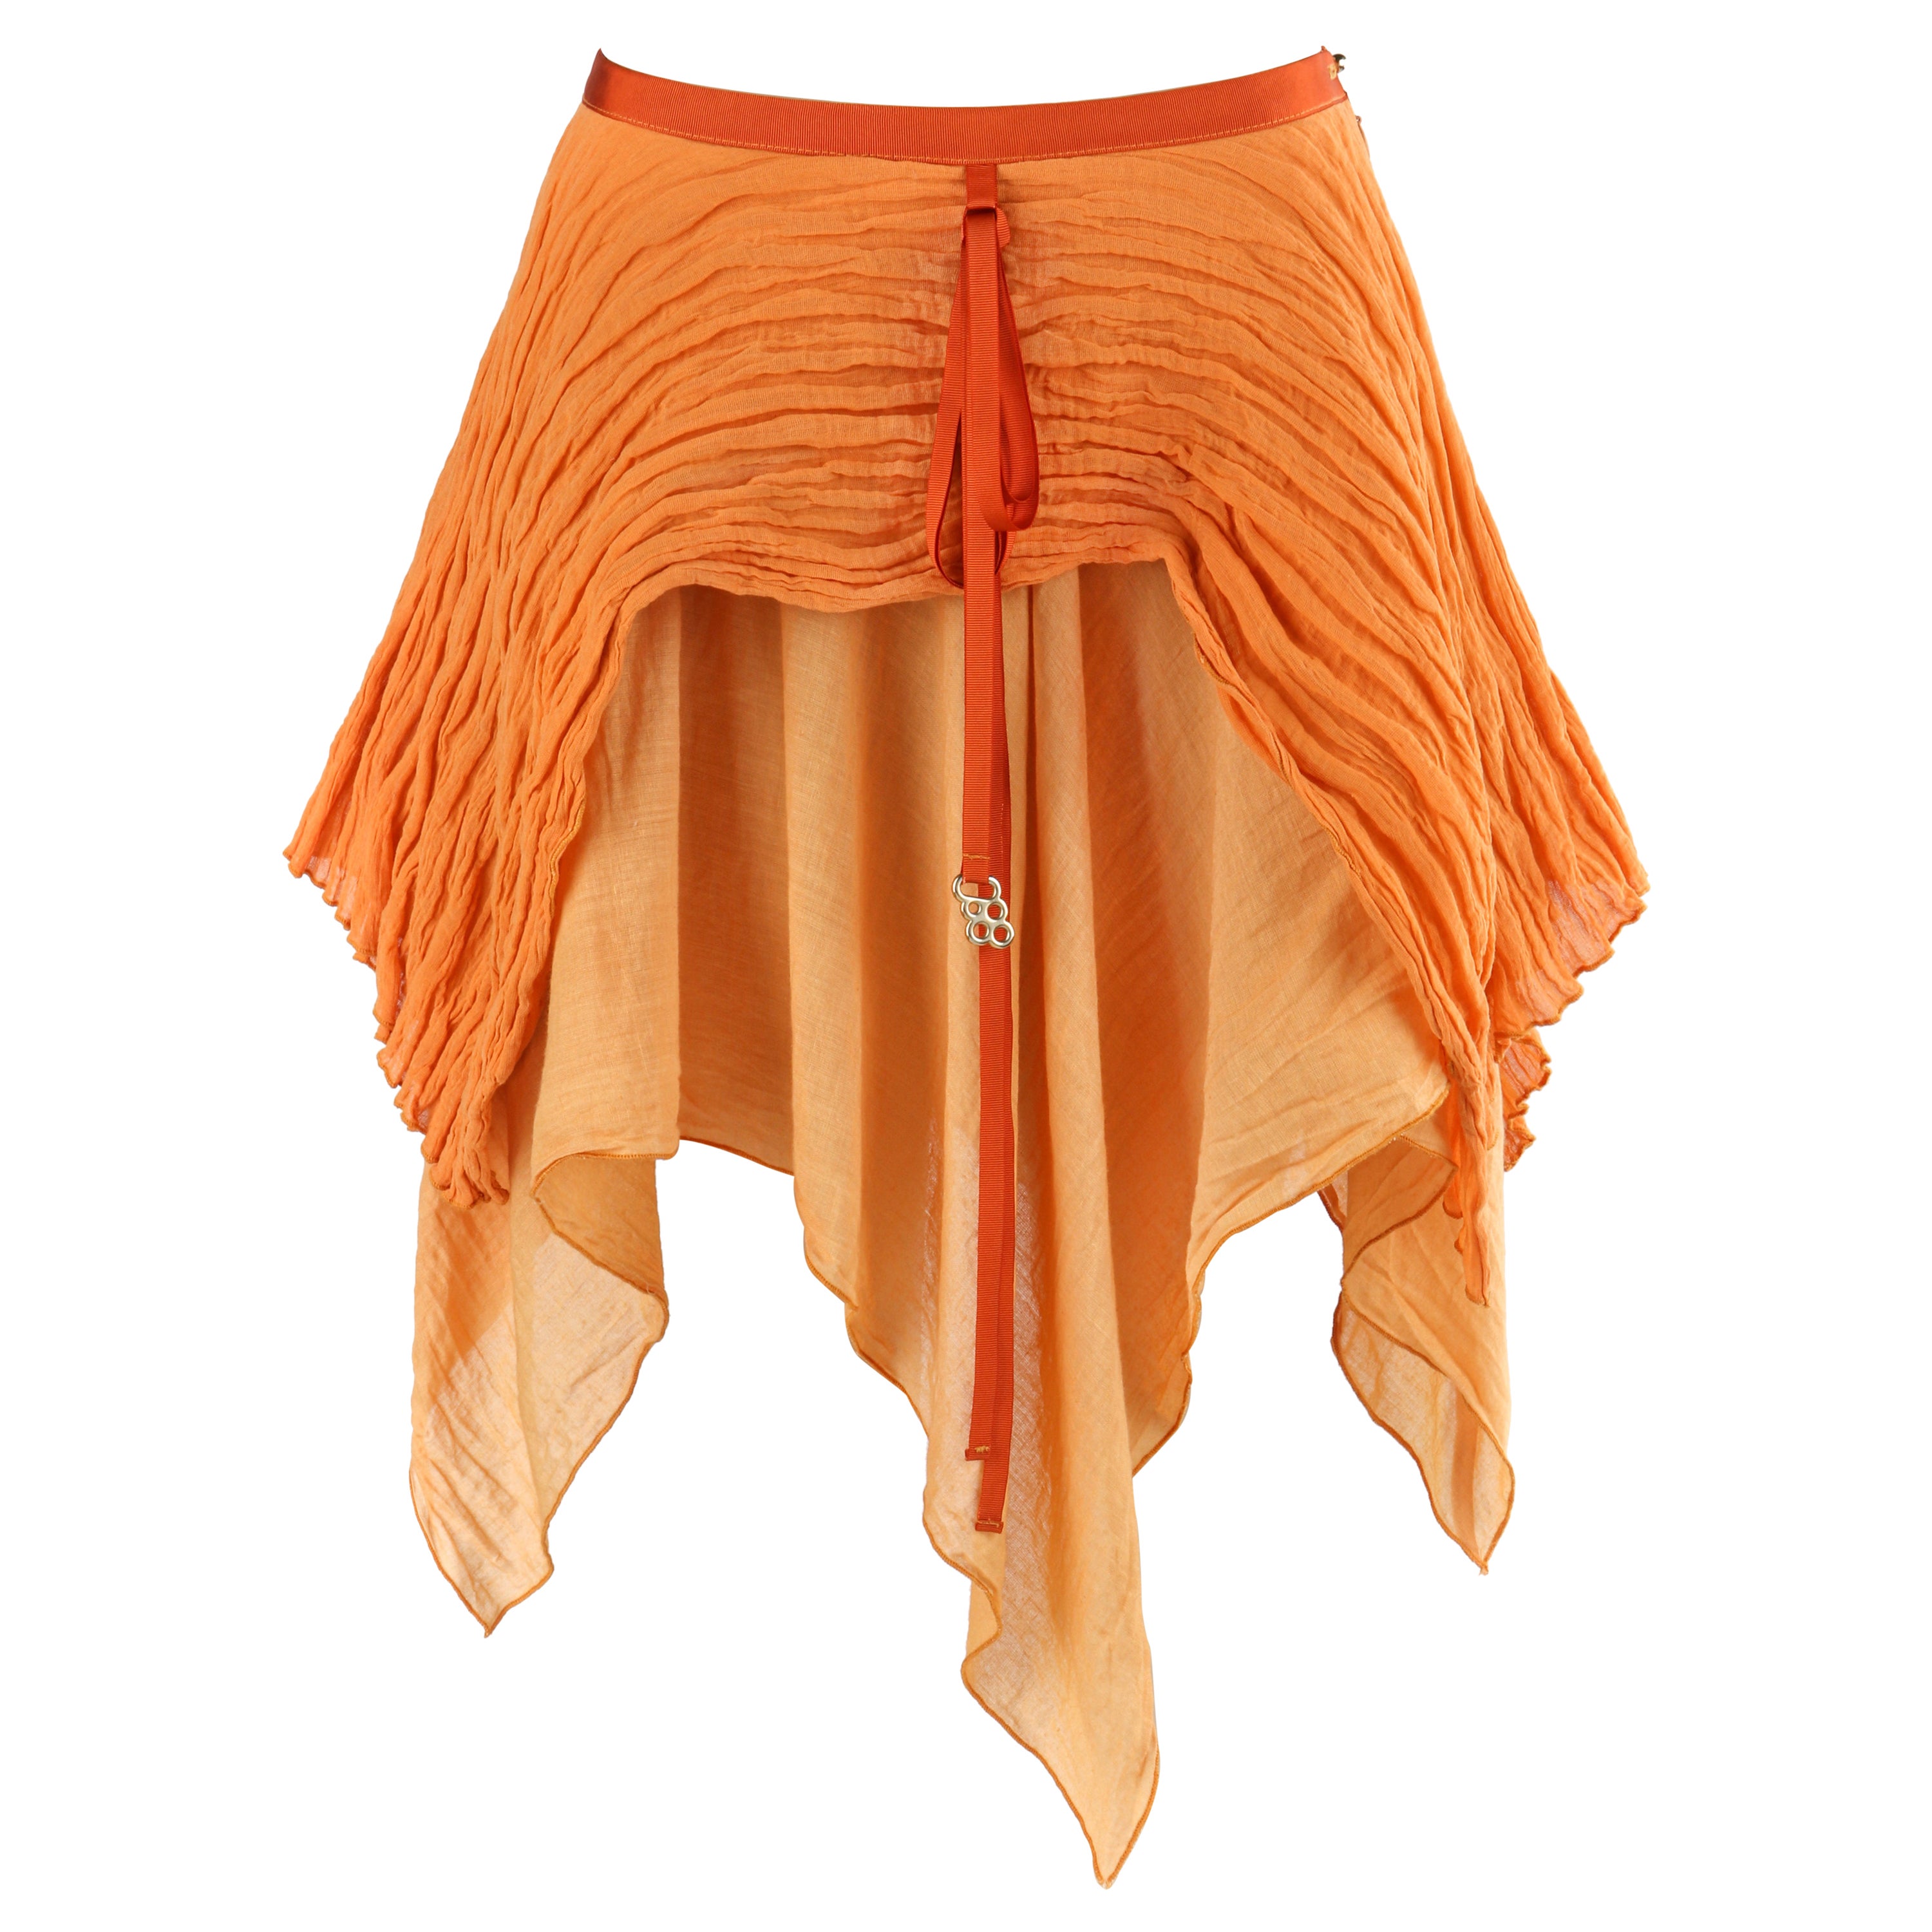 ALEXANDER McQUEEN S/S 1995 Two Toned Orange Layered Asymmetric Ruffled Skirt  For Sale